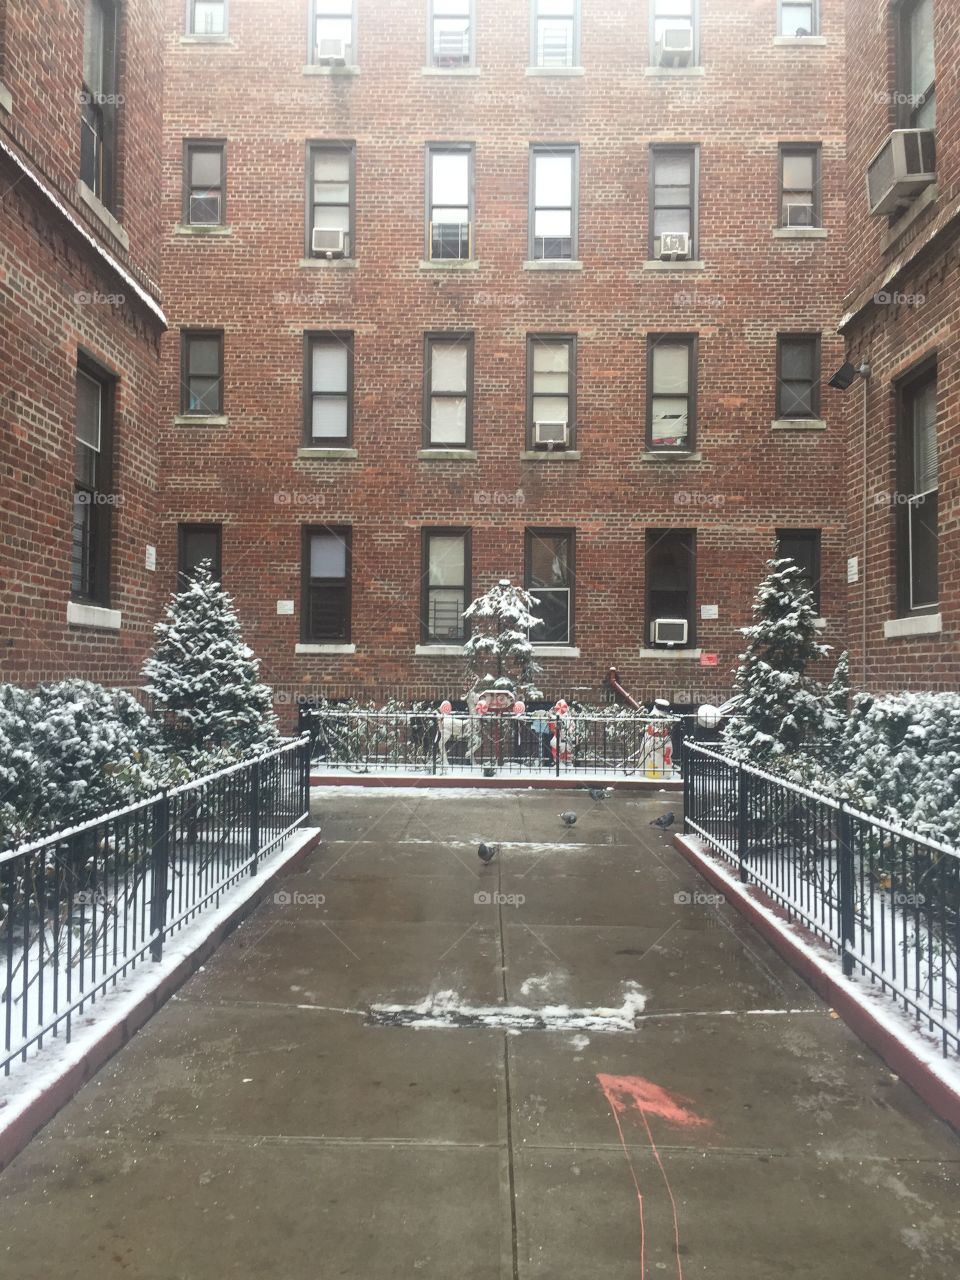 2nd snowfall on decorated Christmas in New York 